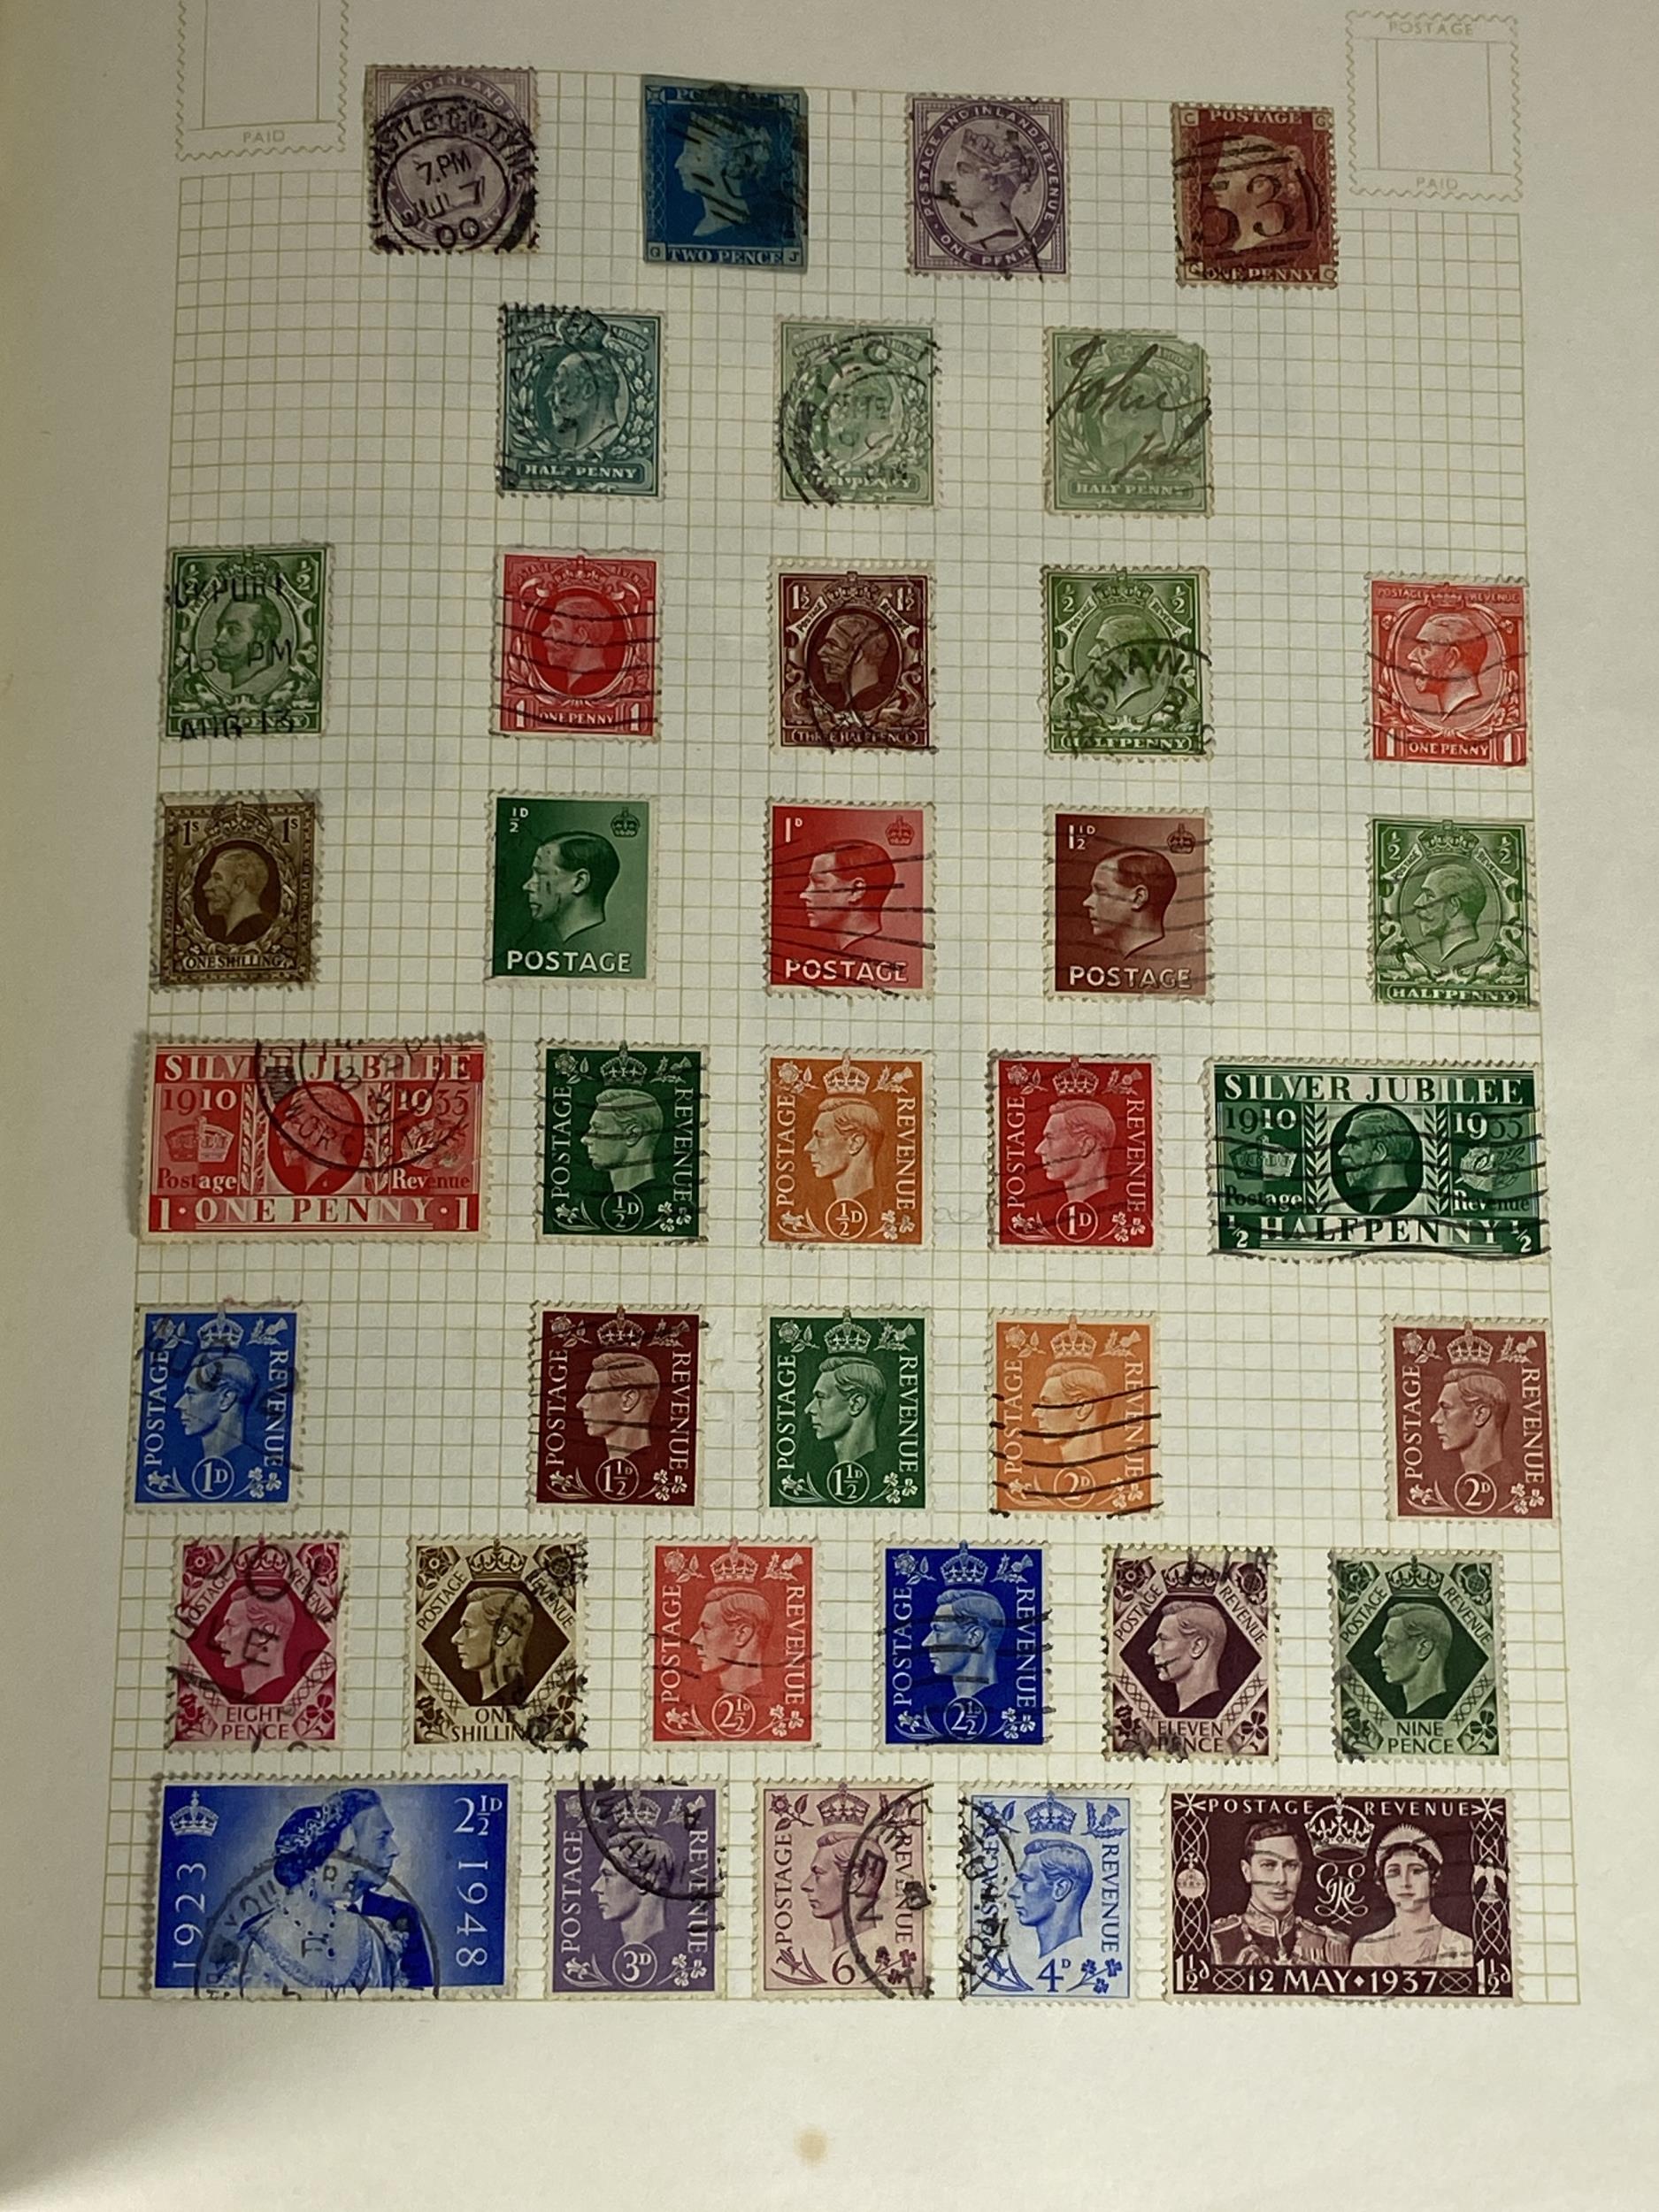 A STAMP ALBUM CONTAINING QUEEN ELIZABETH II MINT AND USED STAMPS, FIRST DAY COVERS AND PACKETS OF - Image 3 of 3